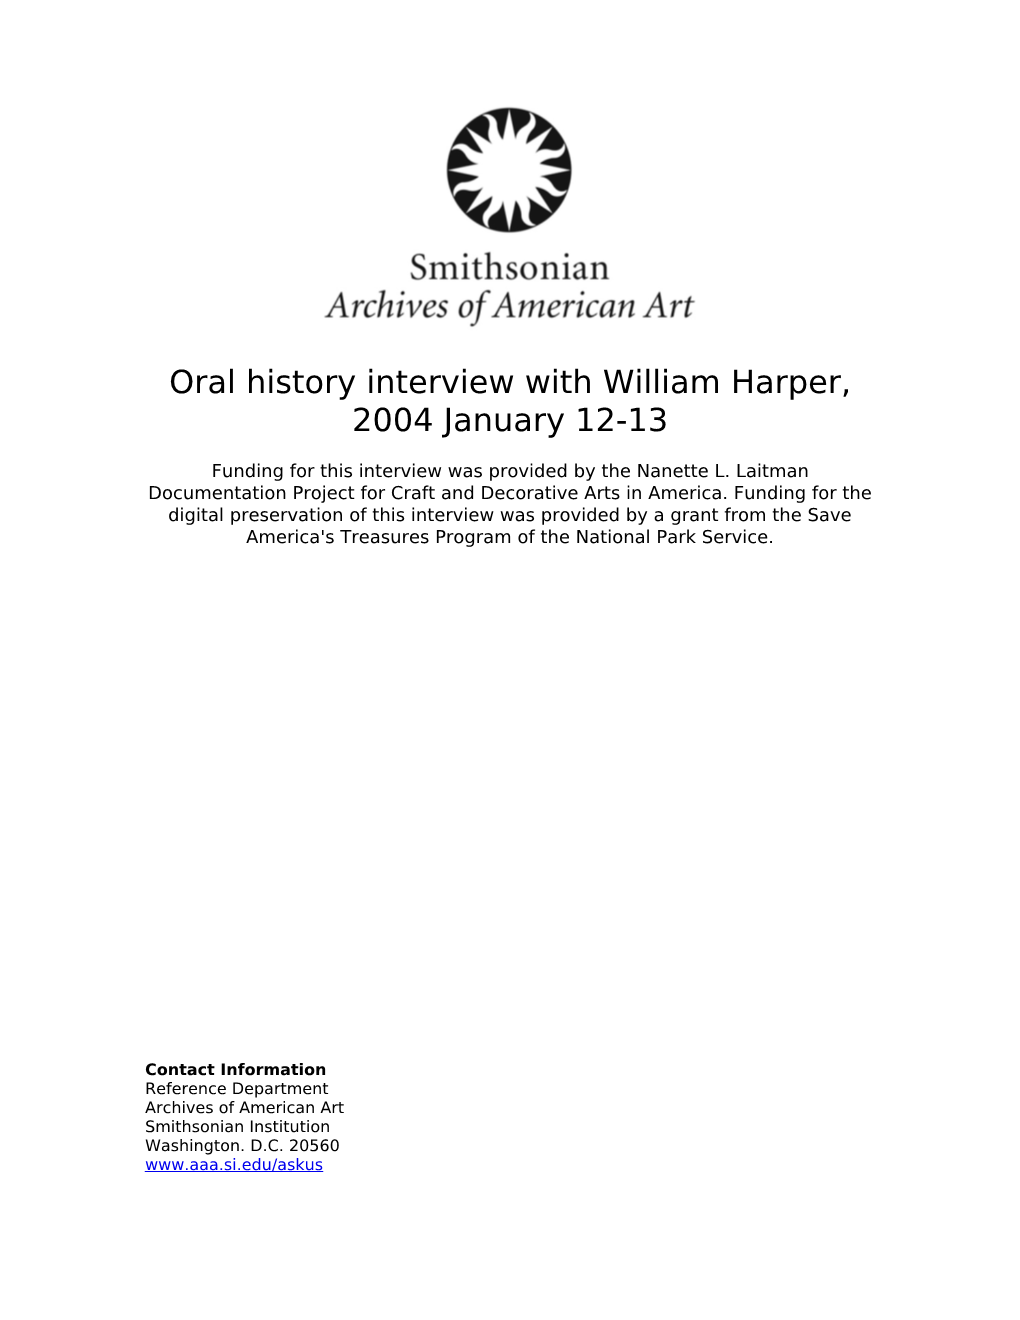 Oral History Interview with William Harper, 2004 January 12-13